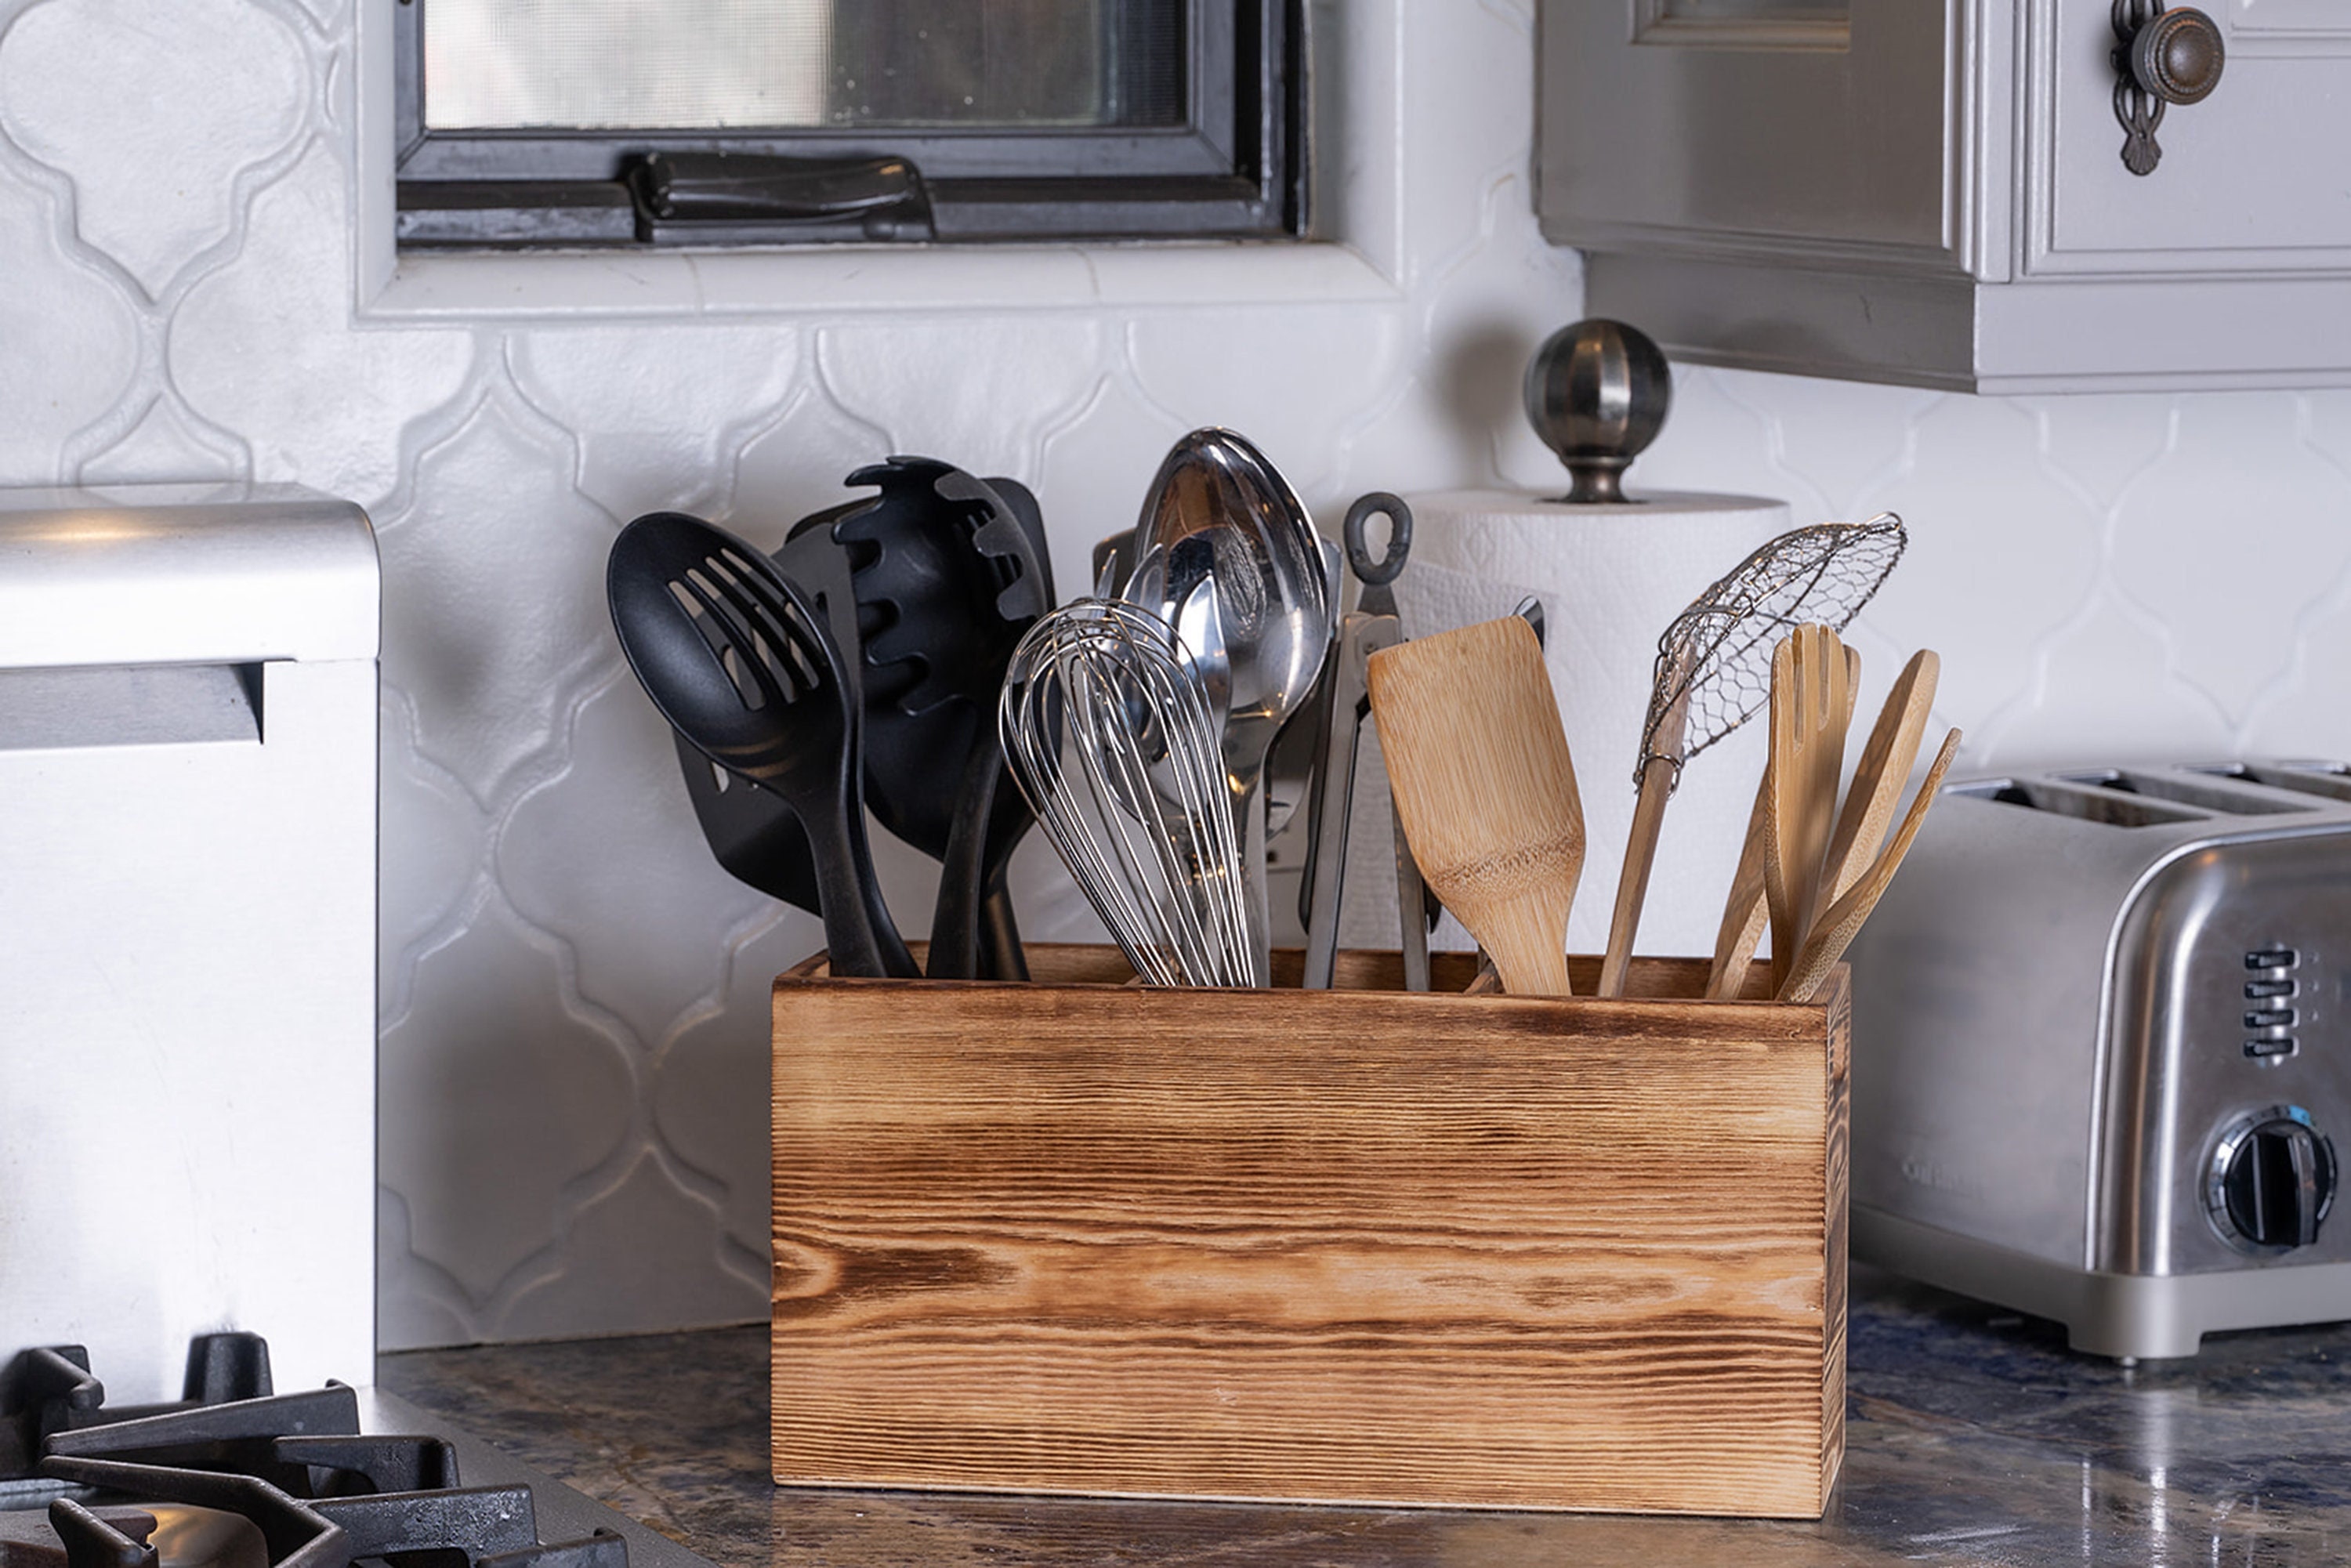 Decorative Countertop Utensil Holders – Specialty Decor by Sunland